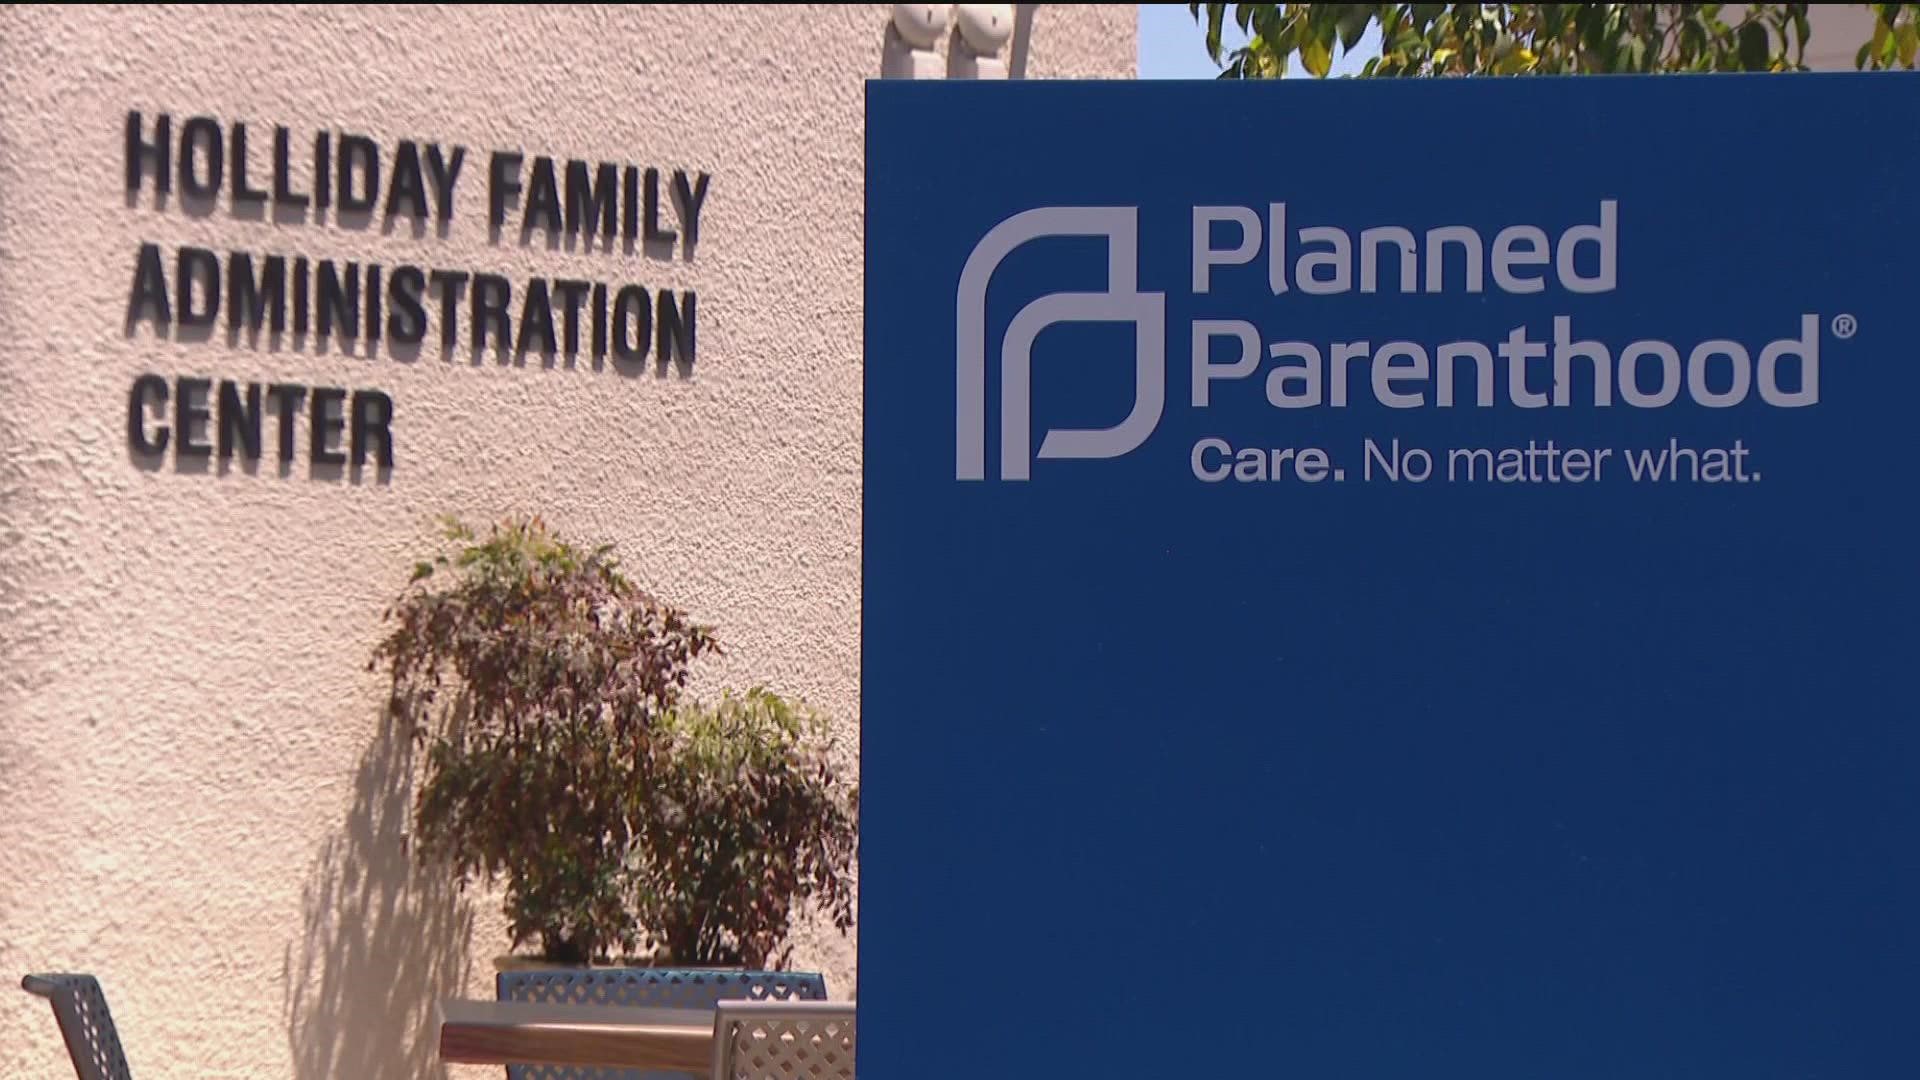 The president of the local Planned Parenthood chapter had strong reaction to the high court's decision Friday.